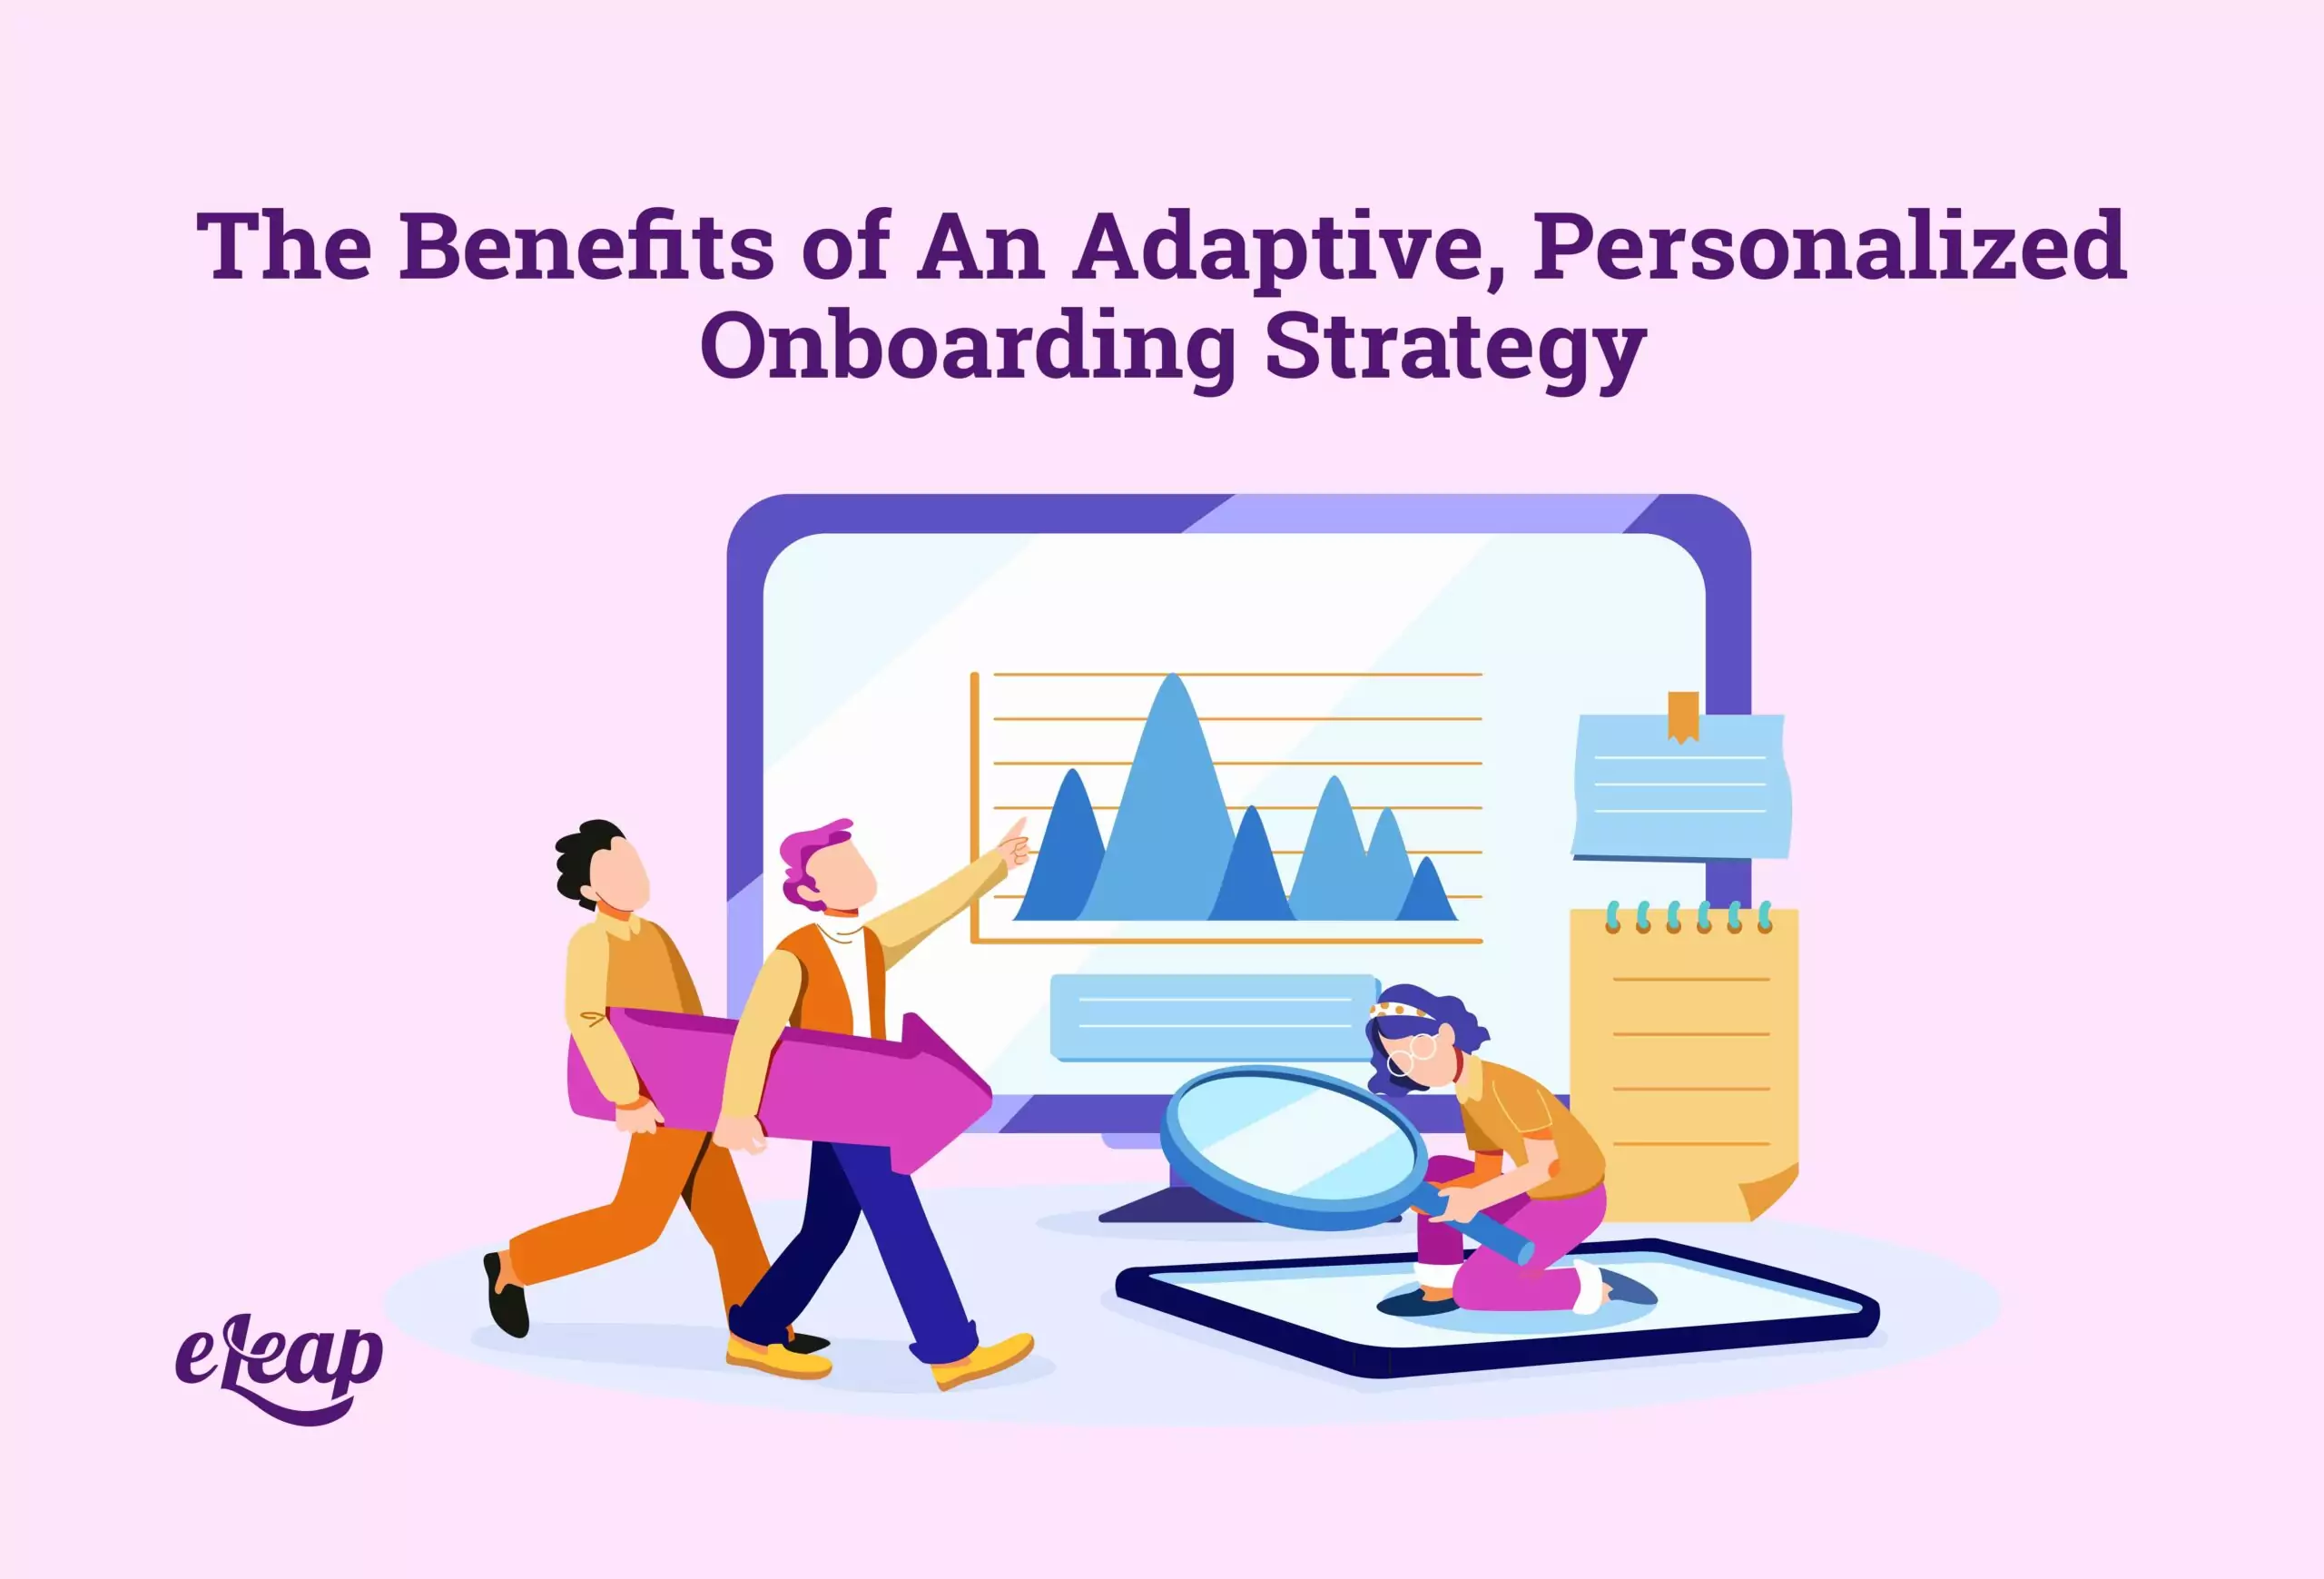 The Benefits of An Adaptive, Personalized Onboarding Strategy